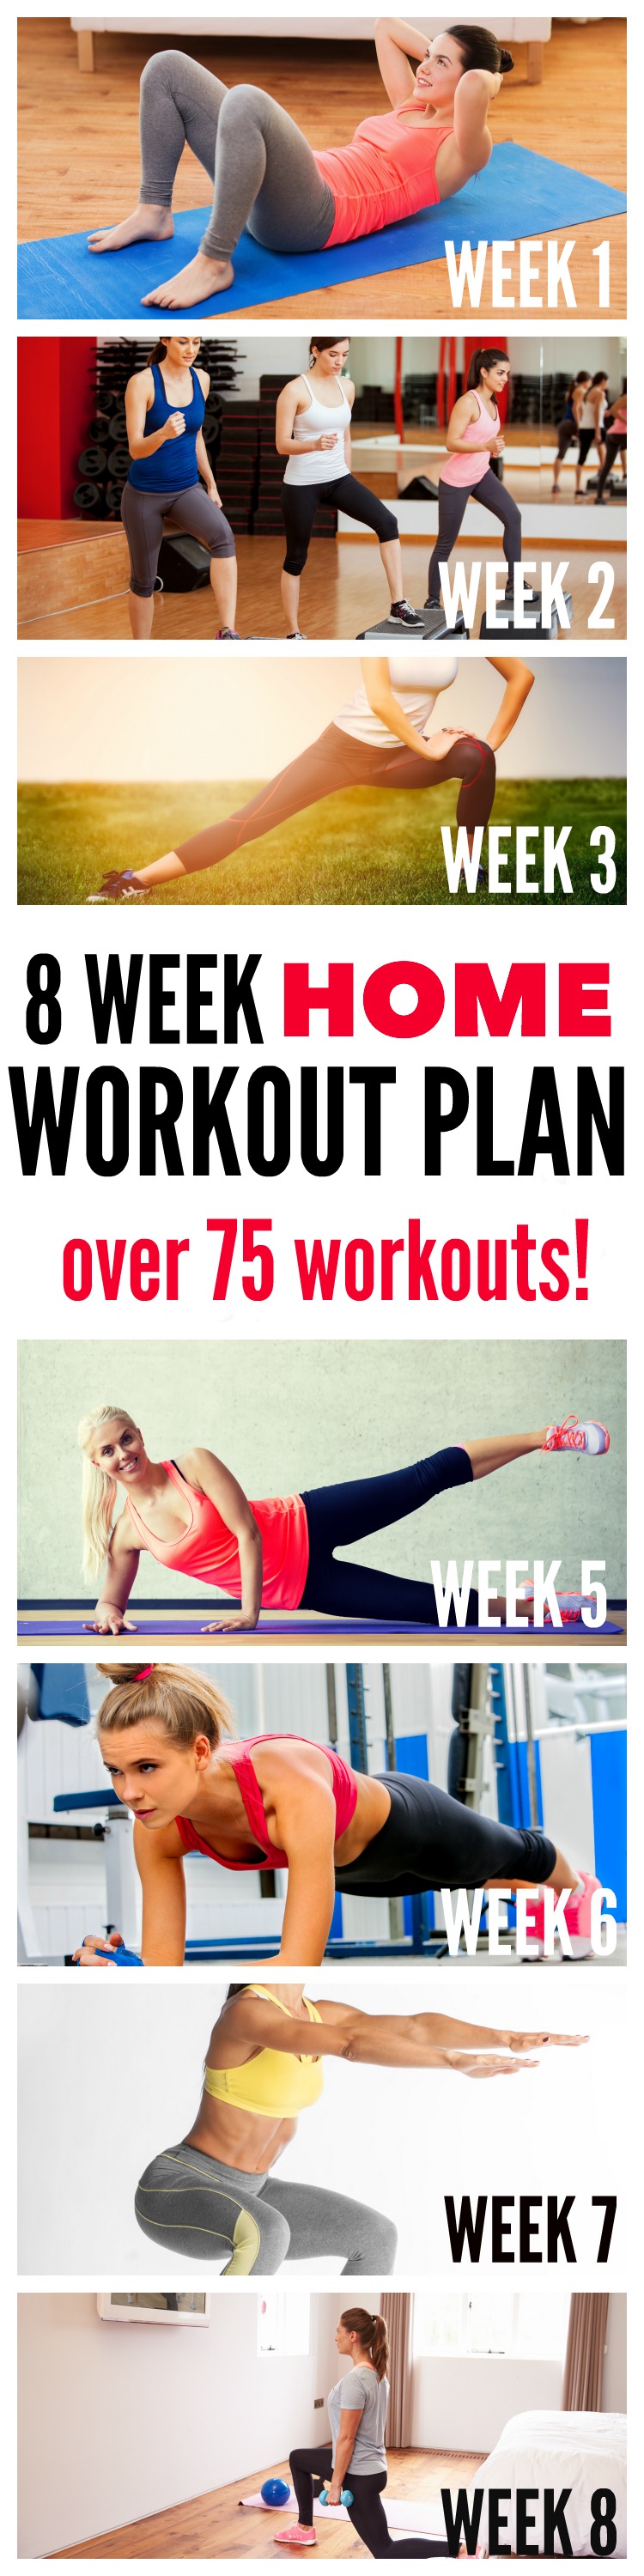 15 Minute 8 week workout plan to lose weight for Beginner